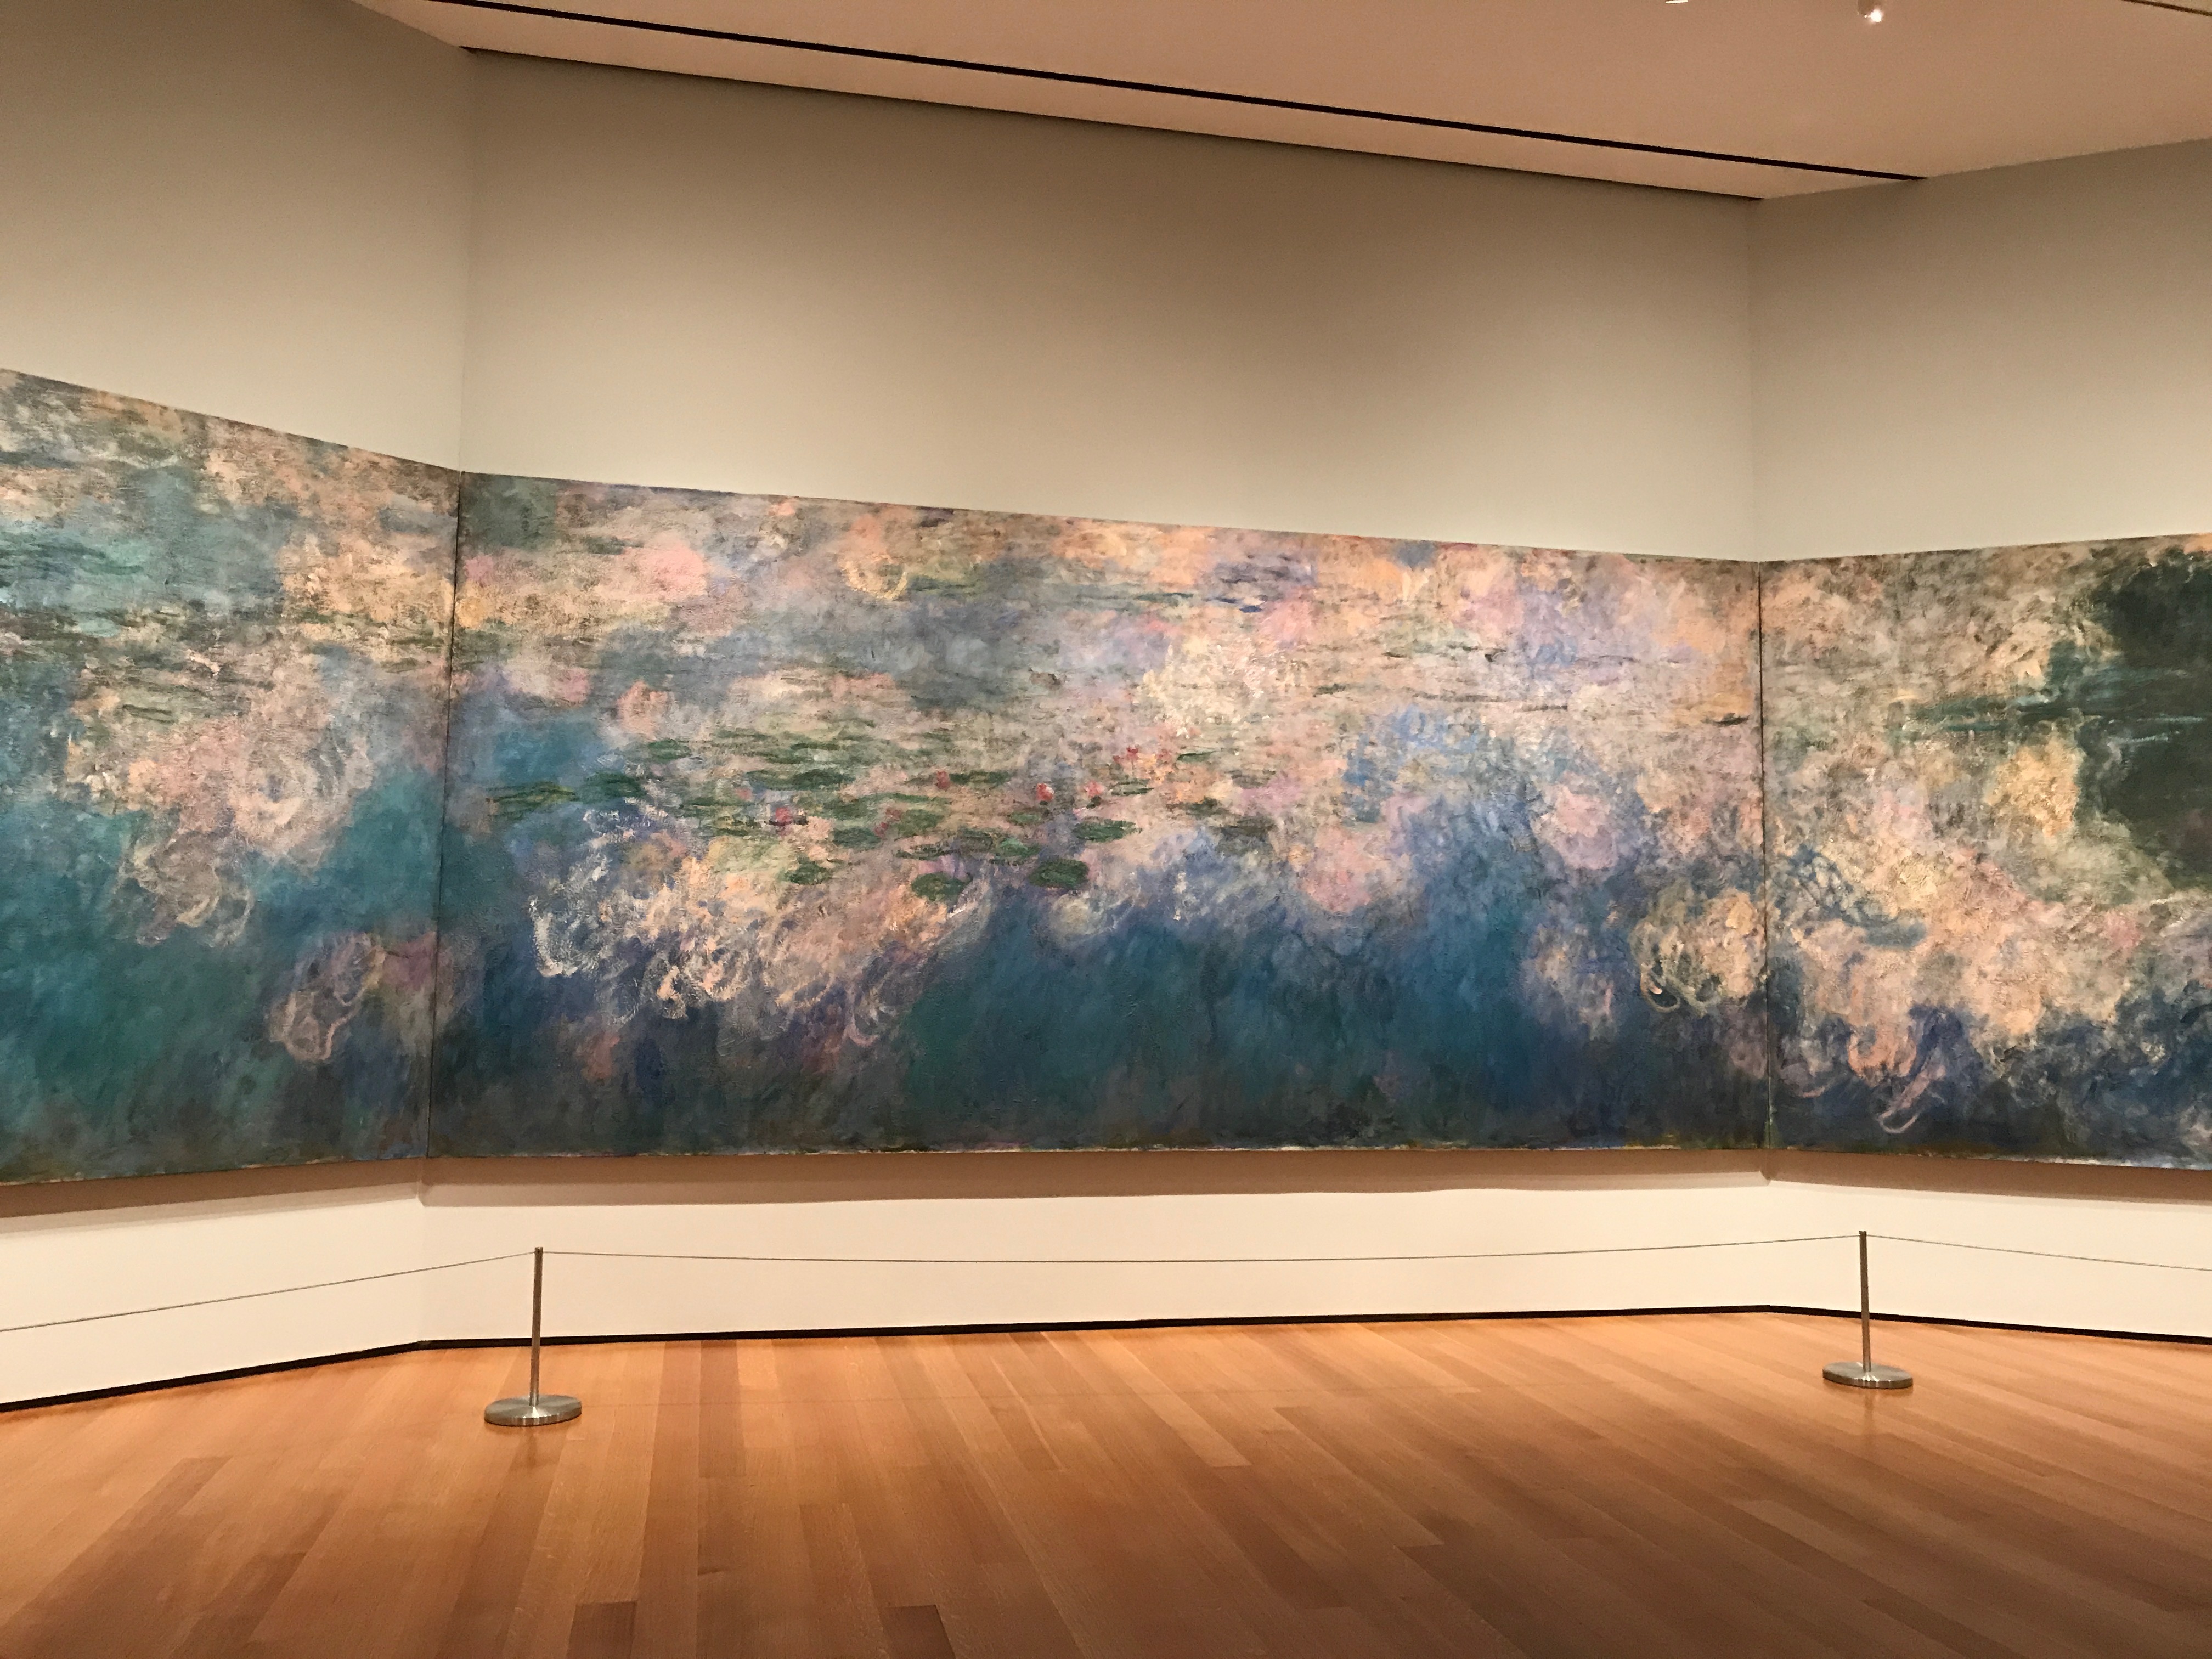 manipulere morbiditet anklageren Monet's Water Lilies at the Museum of Modern Art #WordlessWednesday- NYC  Single Mom